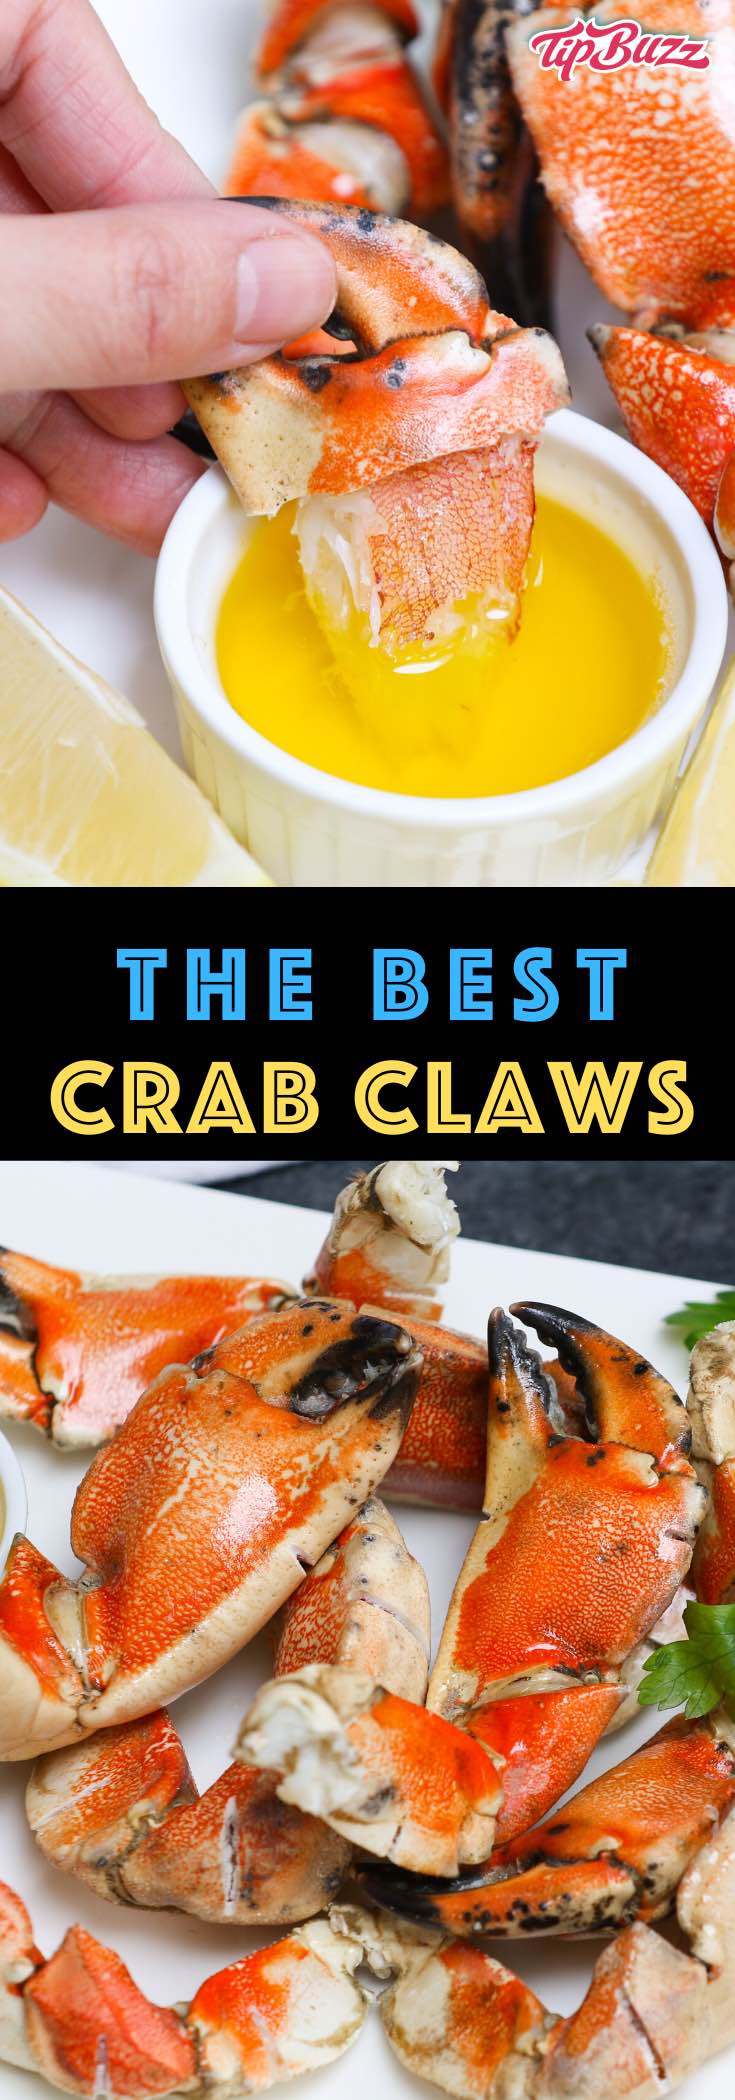 Crab claws are succulent and perfect for sharing with friends! They're easy to make them in minutes for any celebration like the holidays, New Year's or Valentine's!